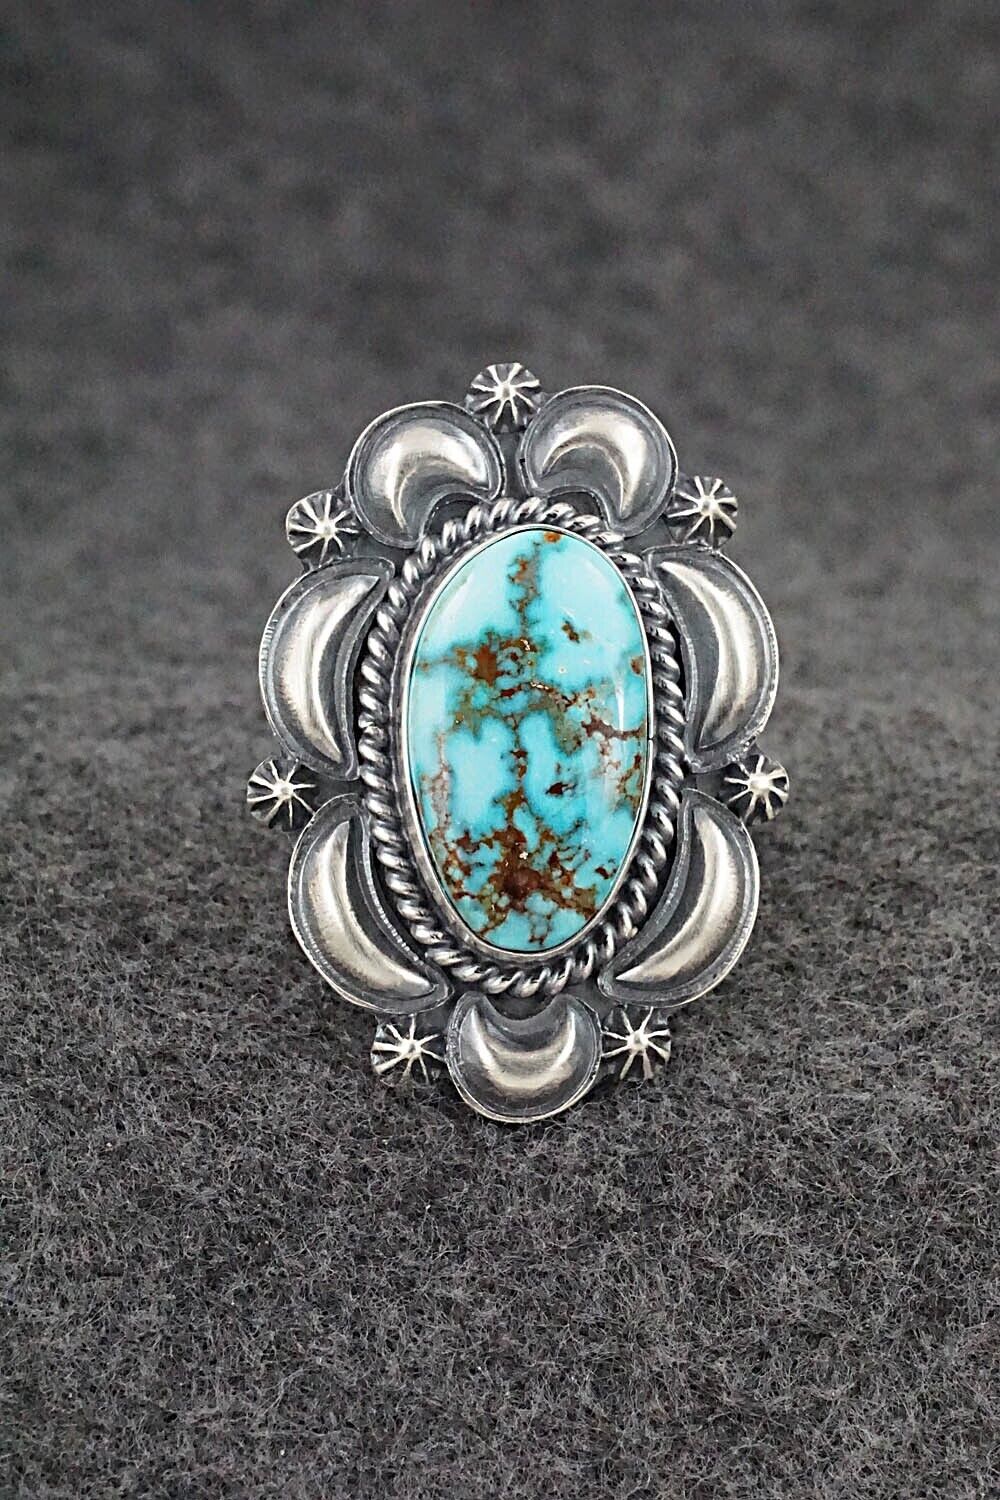 Turquoise & Sterling Silver Ring - Raymond Delgarito - Size 7